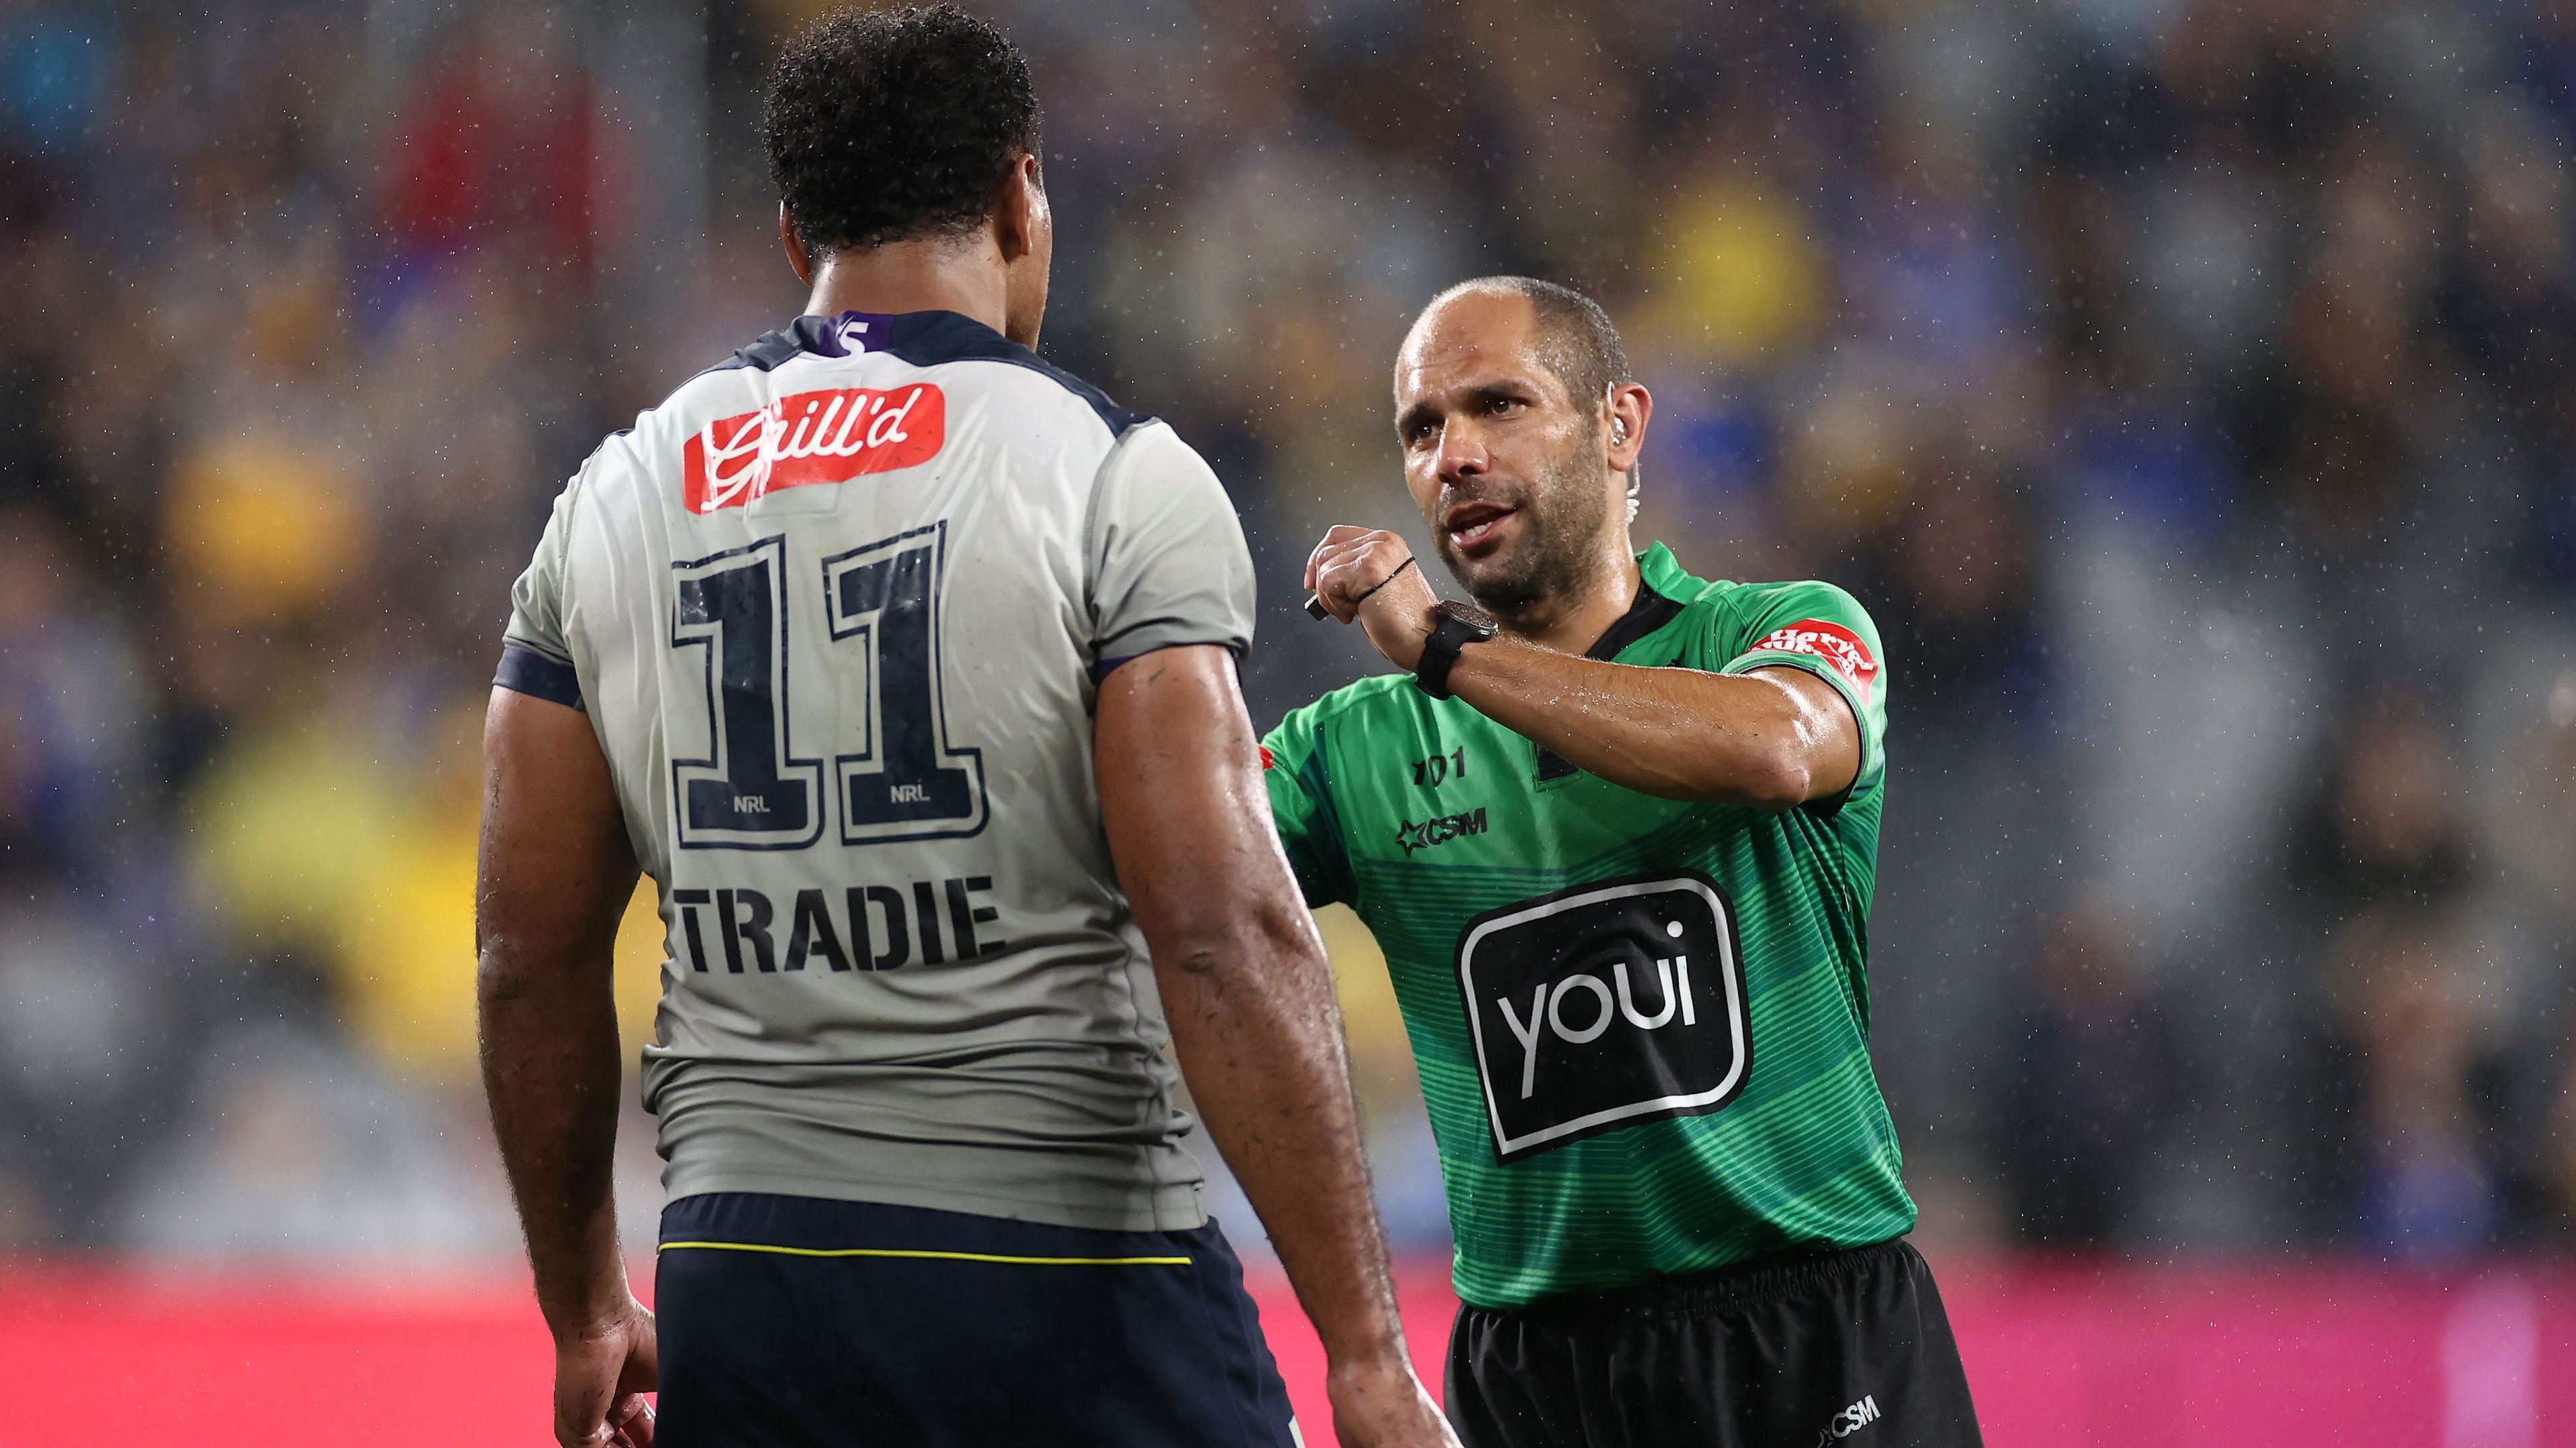 Felise Kaufusi is placed on report by referee Ashley Klein for a high hit on Ryan Matterson.